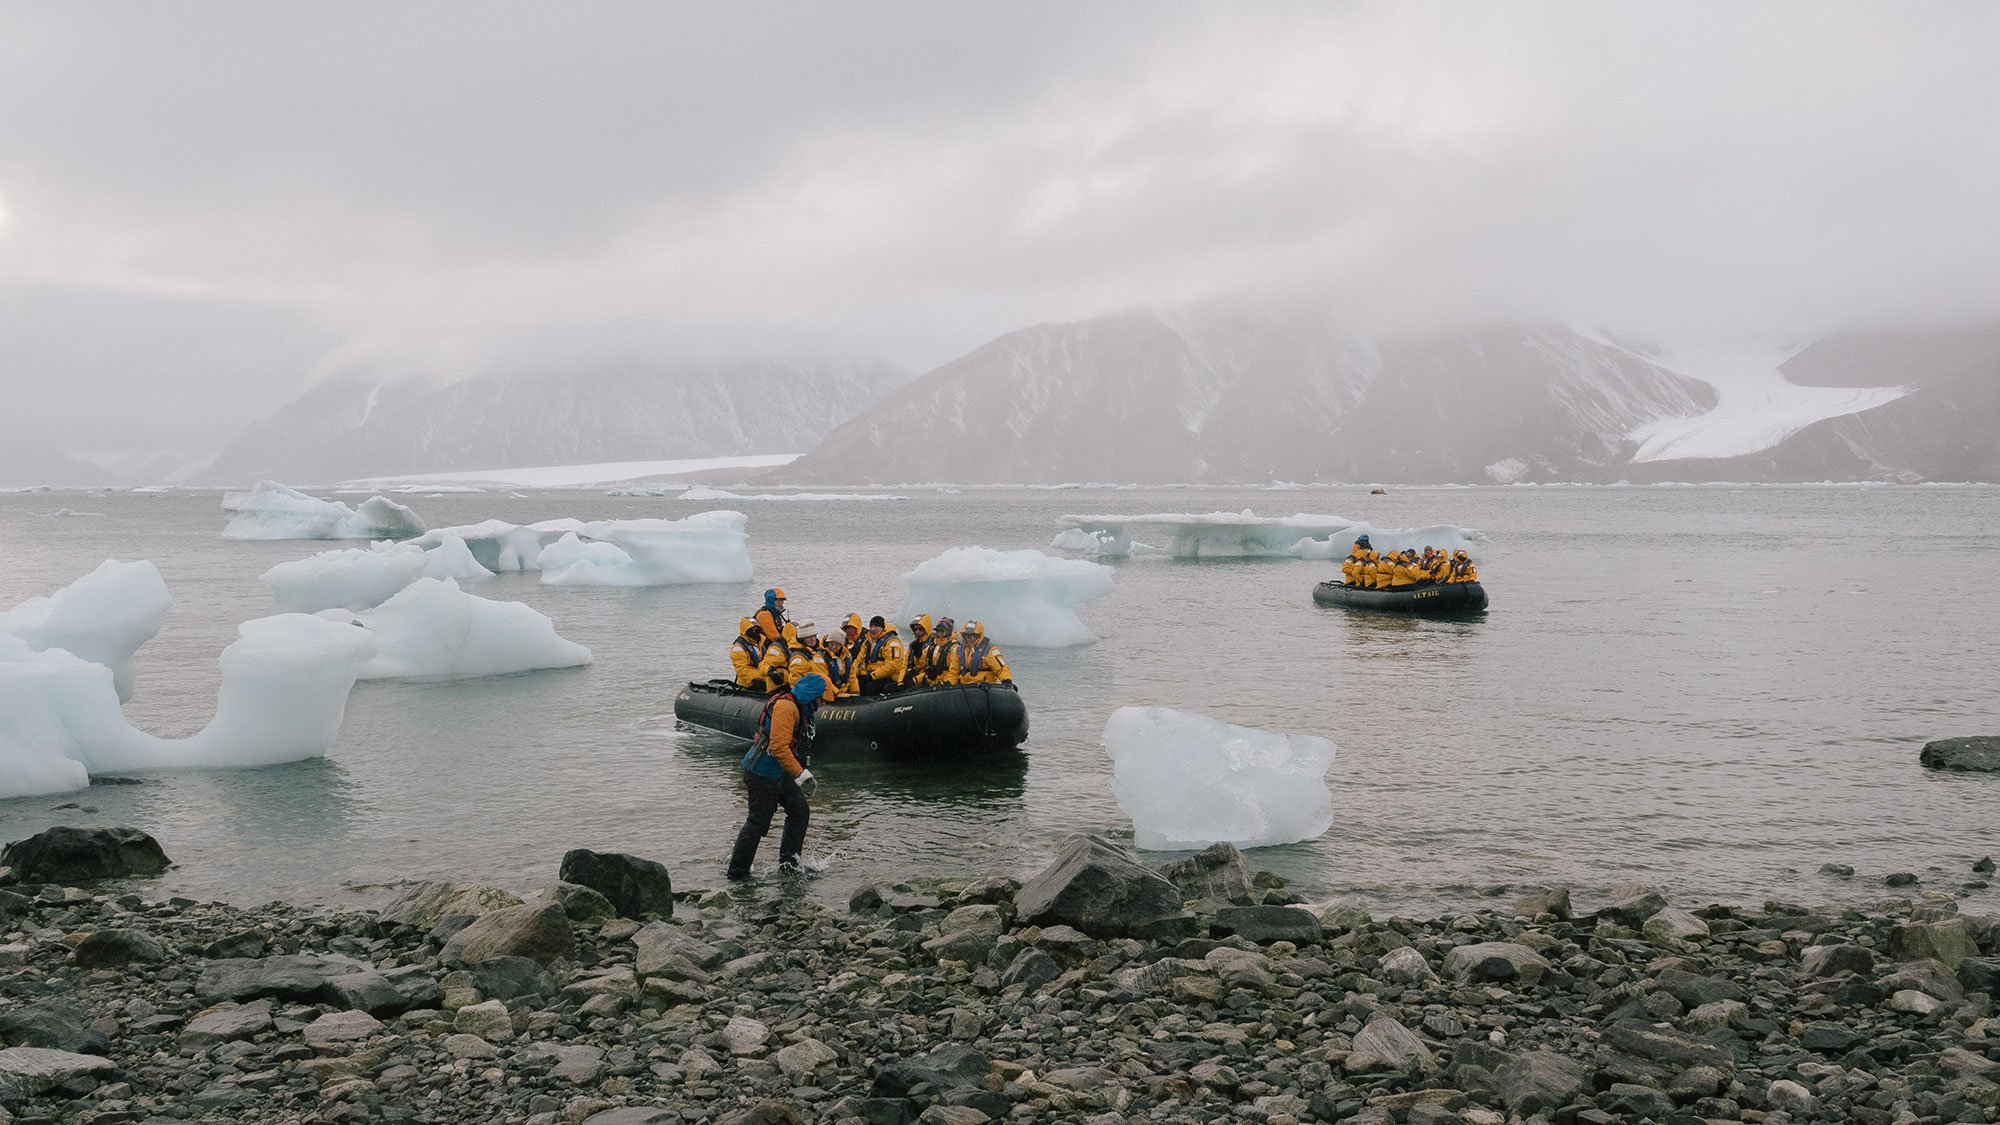 Quark Expeditions' guests enjoyed a guided shore excursion  during a voyage to Ellesmere Island.